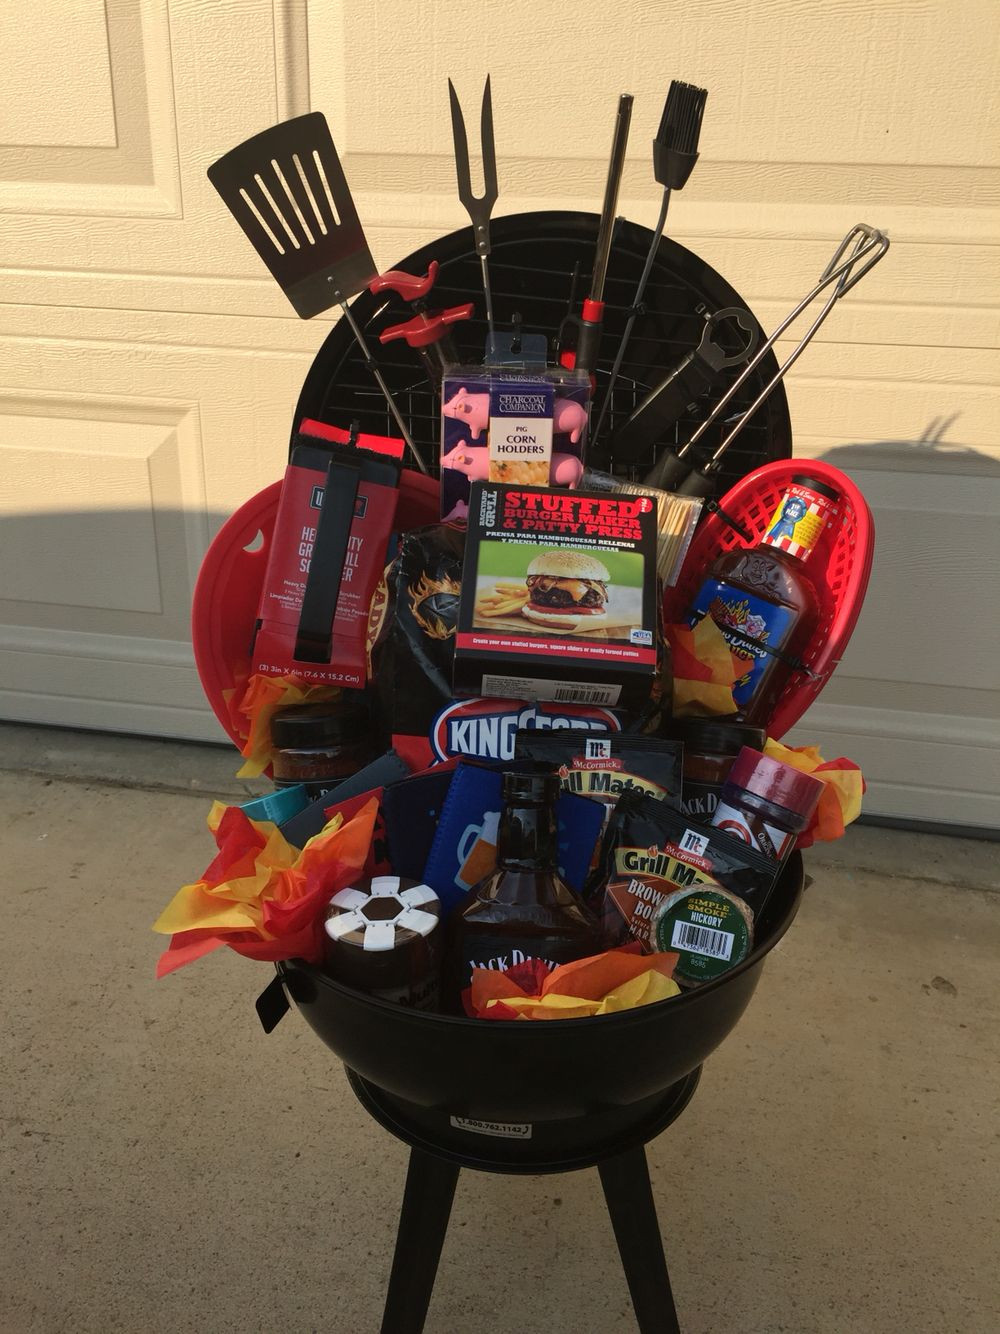 Barbecue Gift Basket Ideas
 My BBQ t basket …